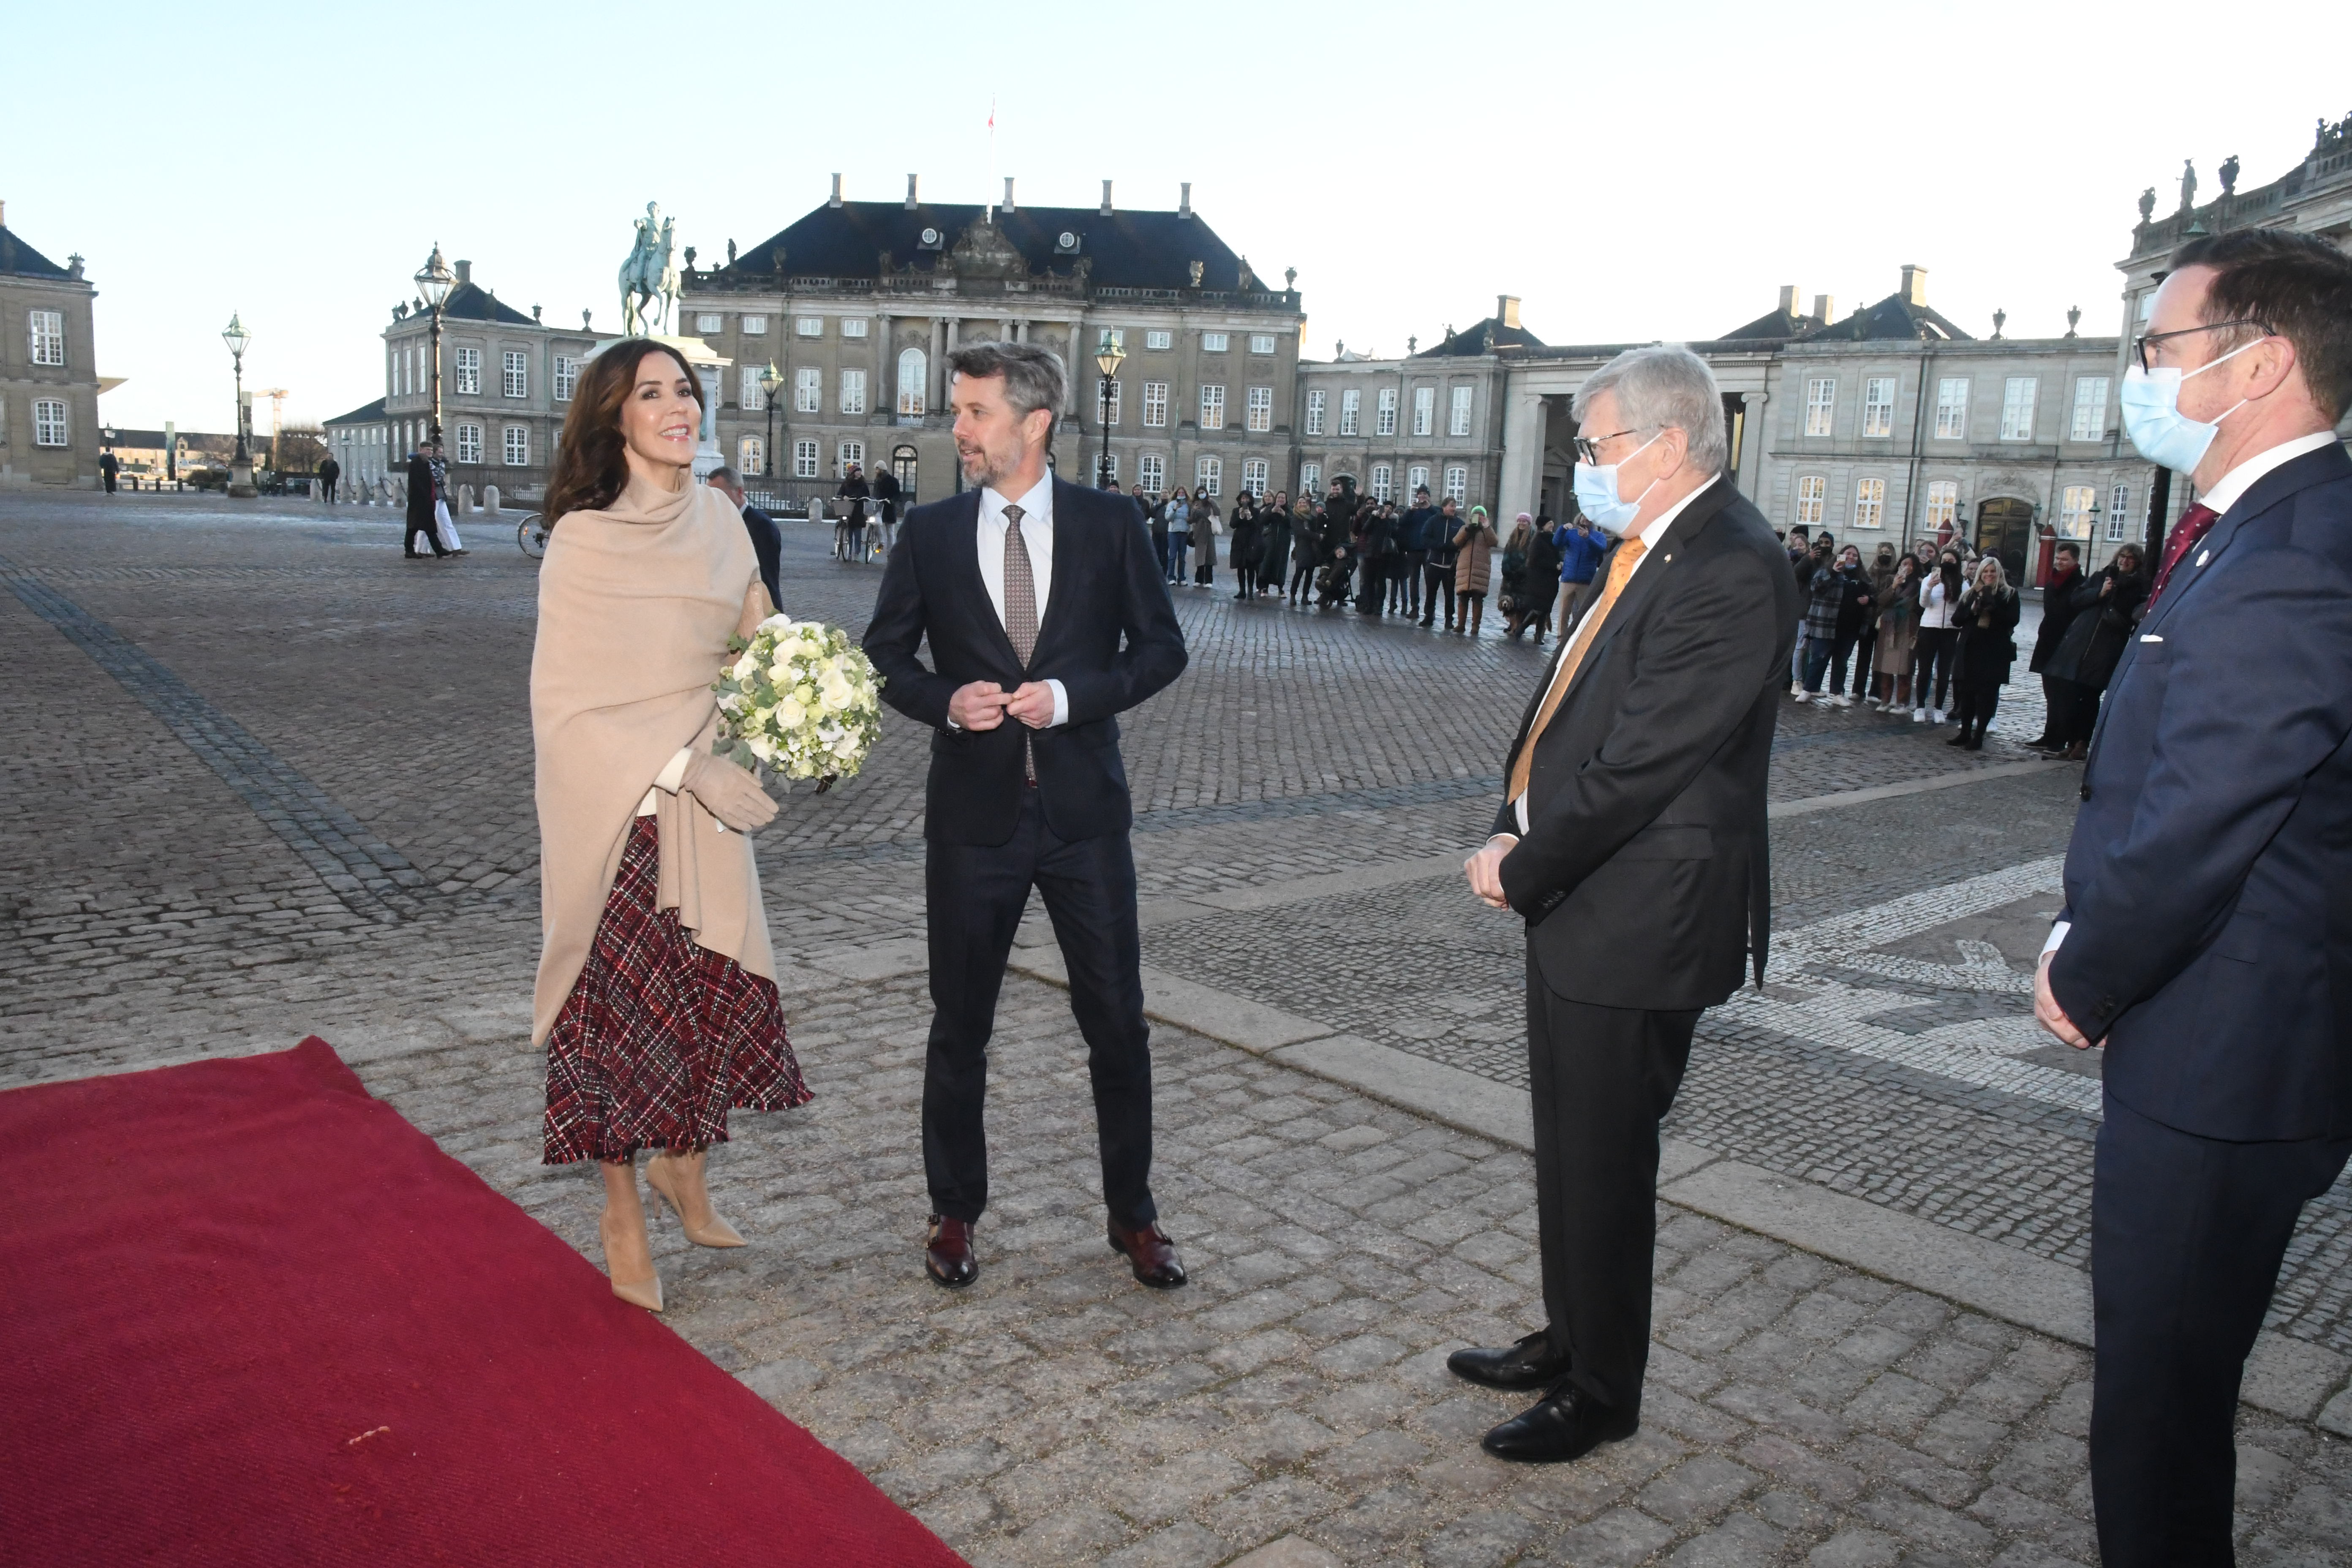 Local Round-Up: City Institutions Still Determined to Honor Crown Princess Mary’s 50th Birthday